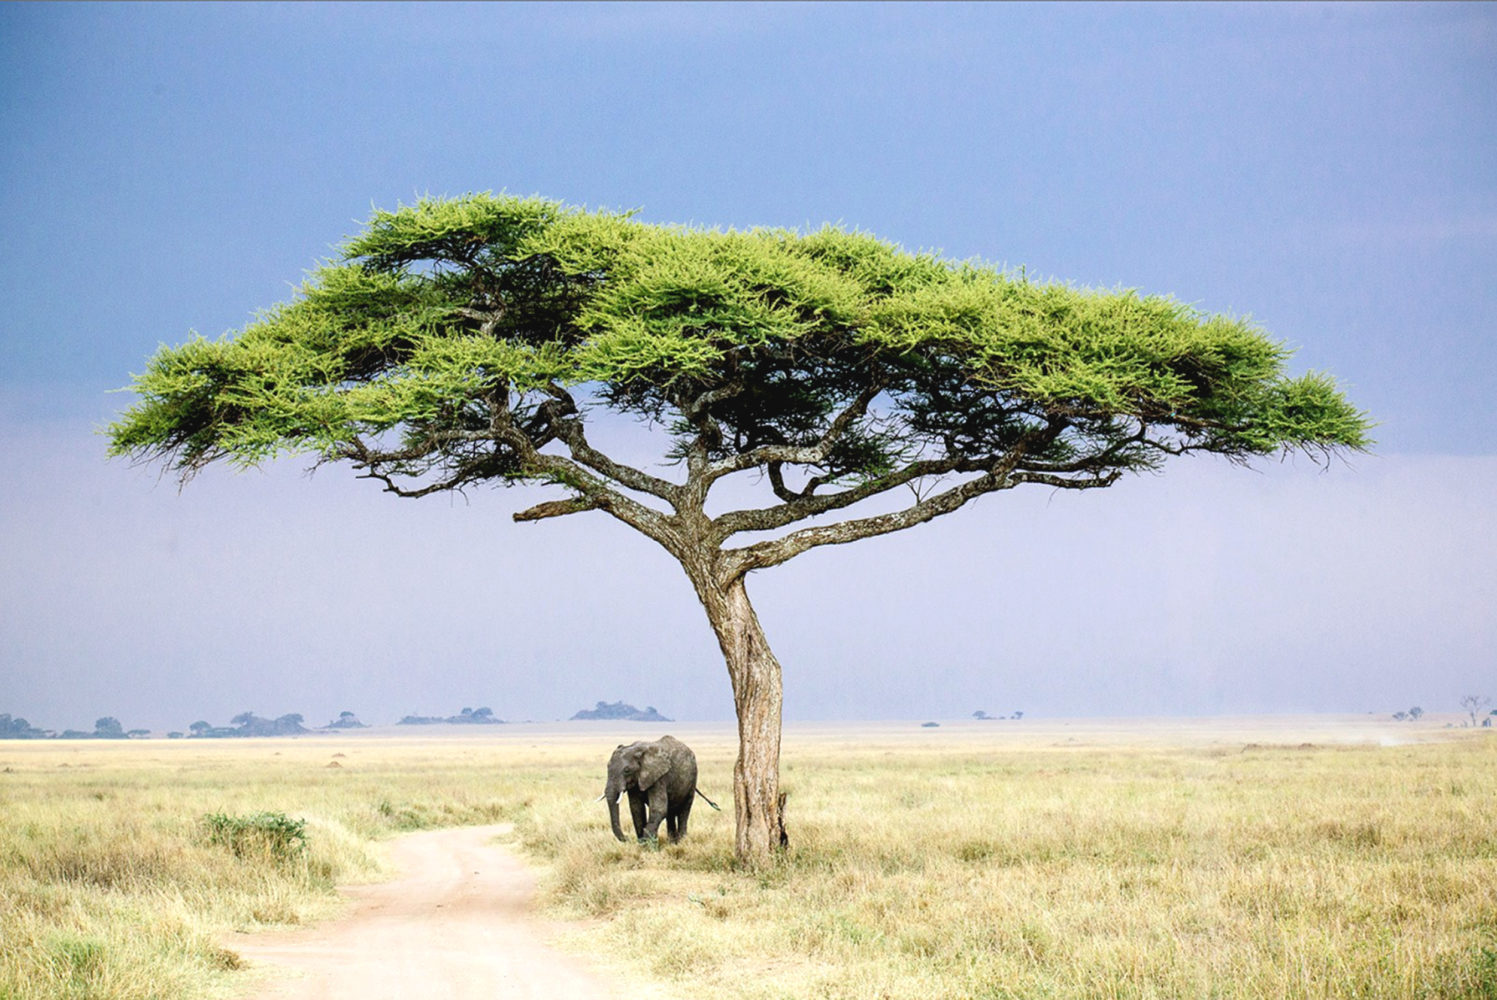 A lone elephant under a solitary flat-topped acacia tree in grassland